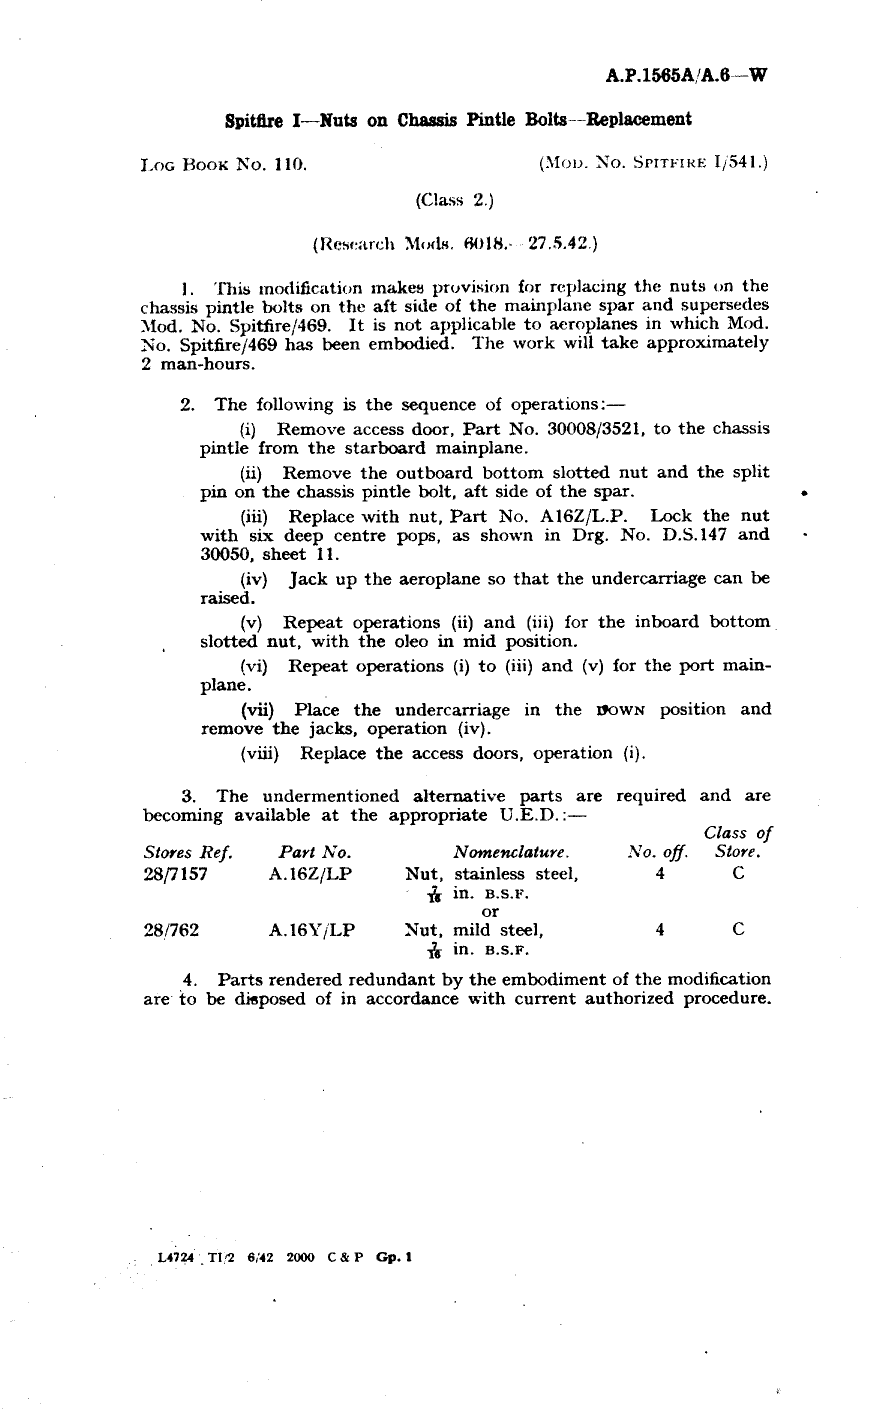 Sample page 1 from AirCorps Library document: Spitfire I Nuts on Classic Pintle Bolts Replacement